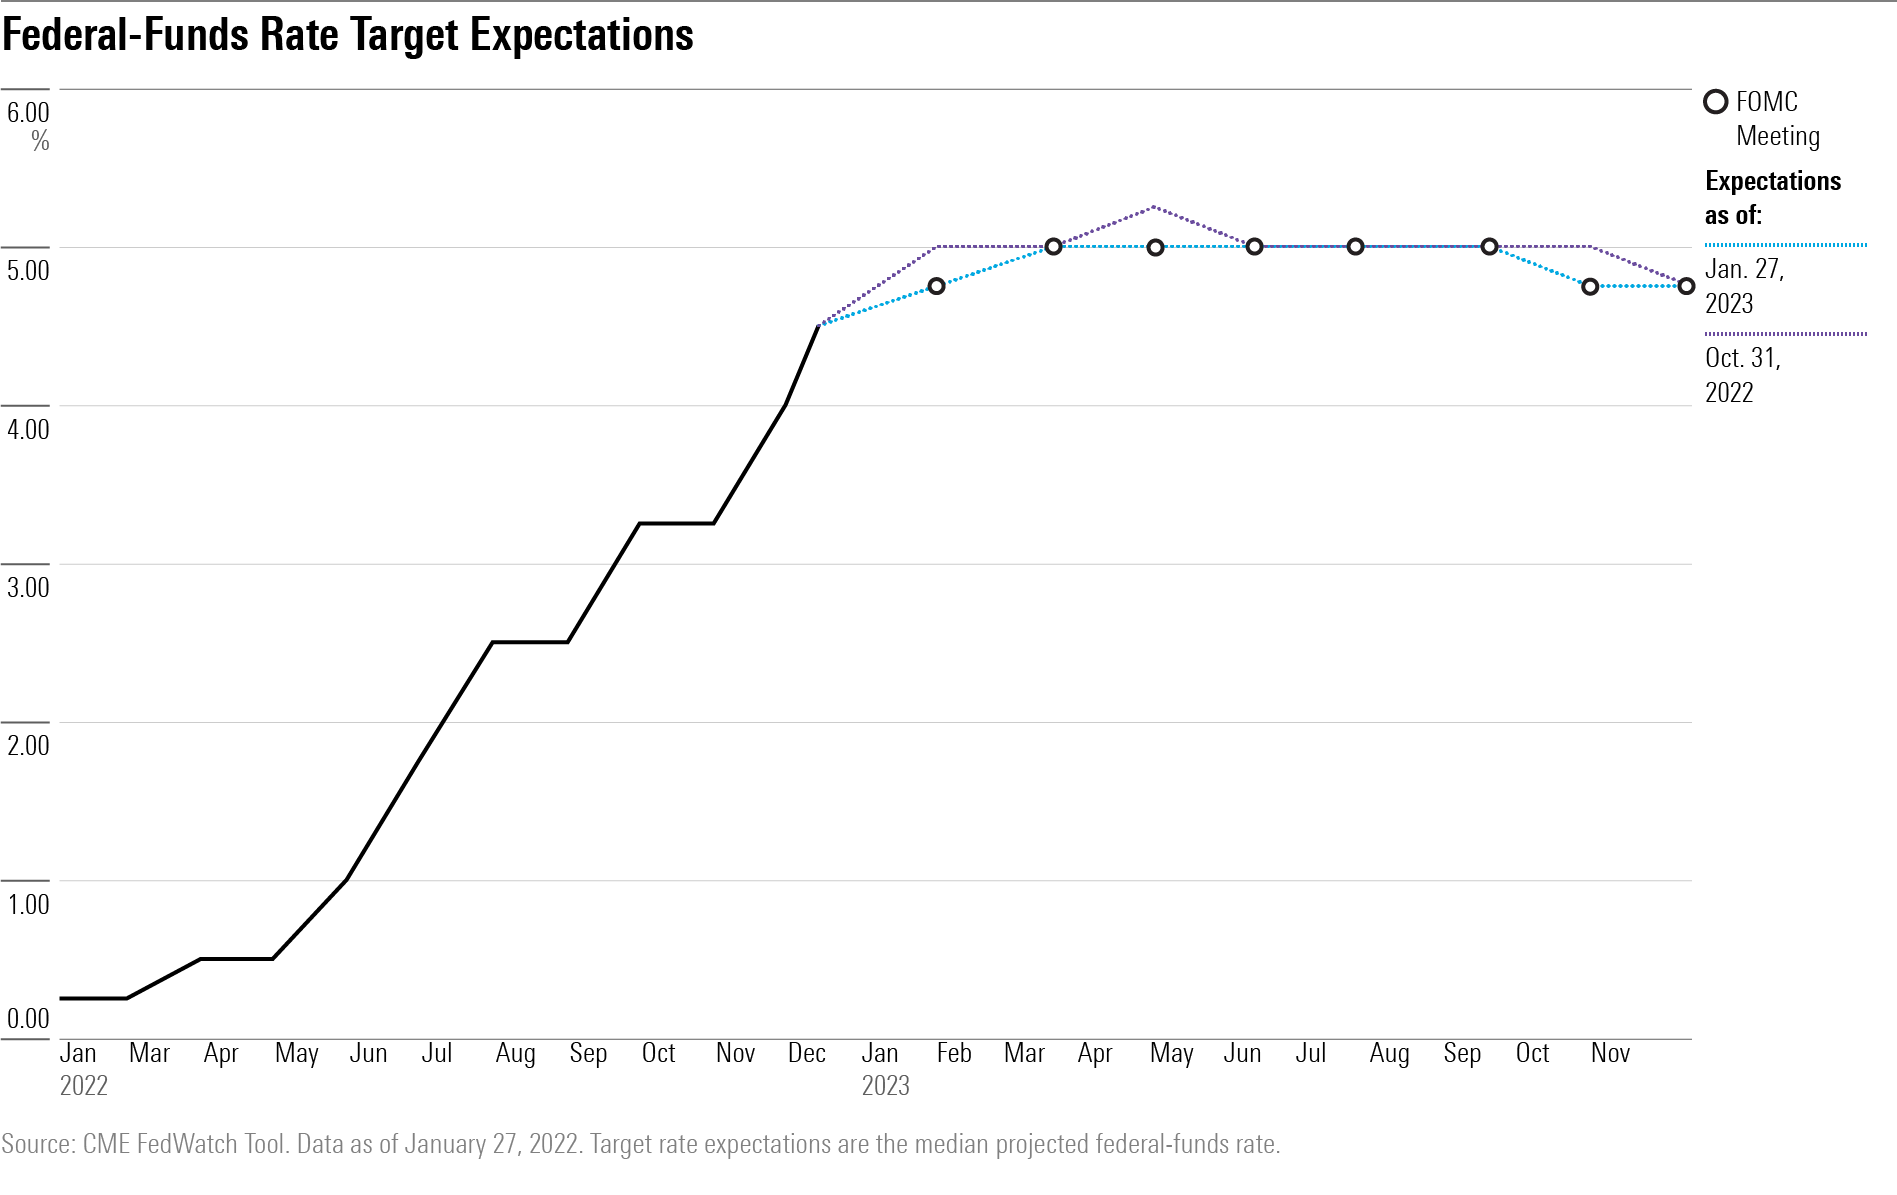 A line chart showing projected federal-funds rate targets through 2023.